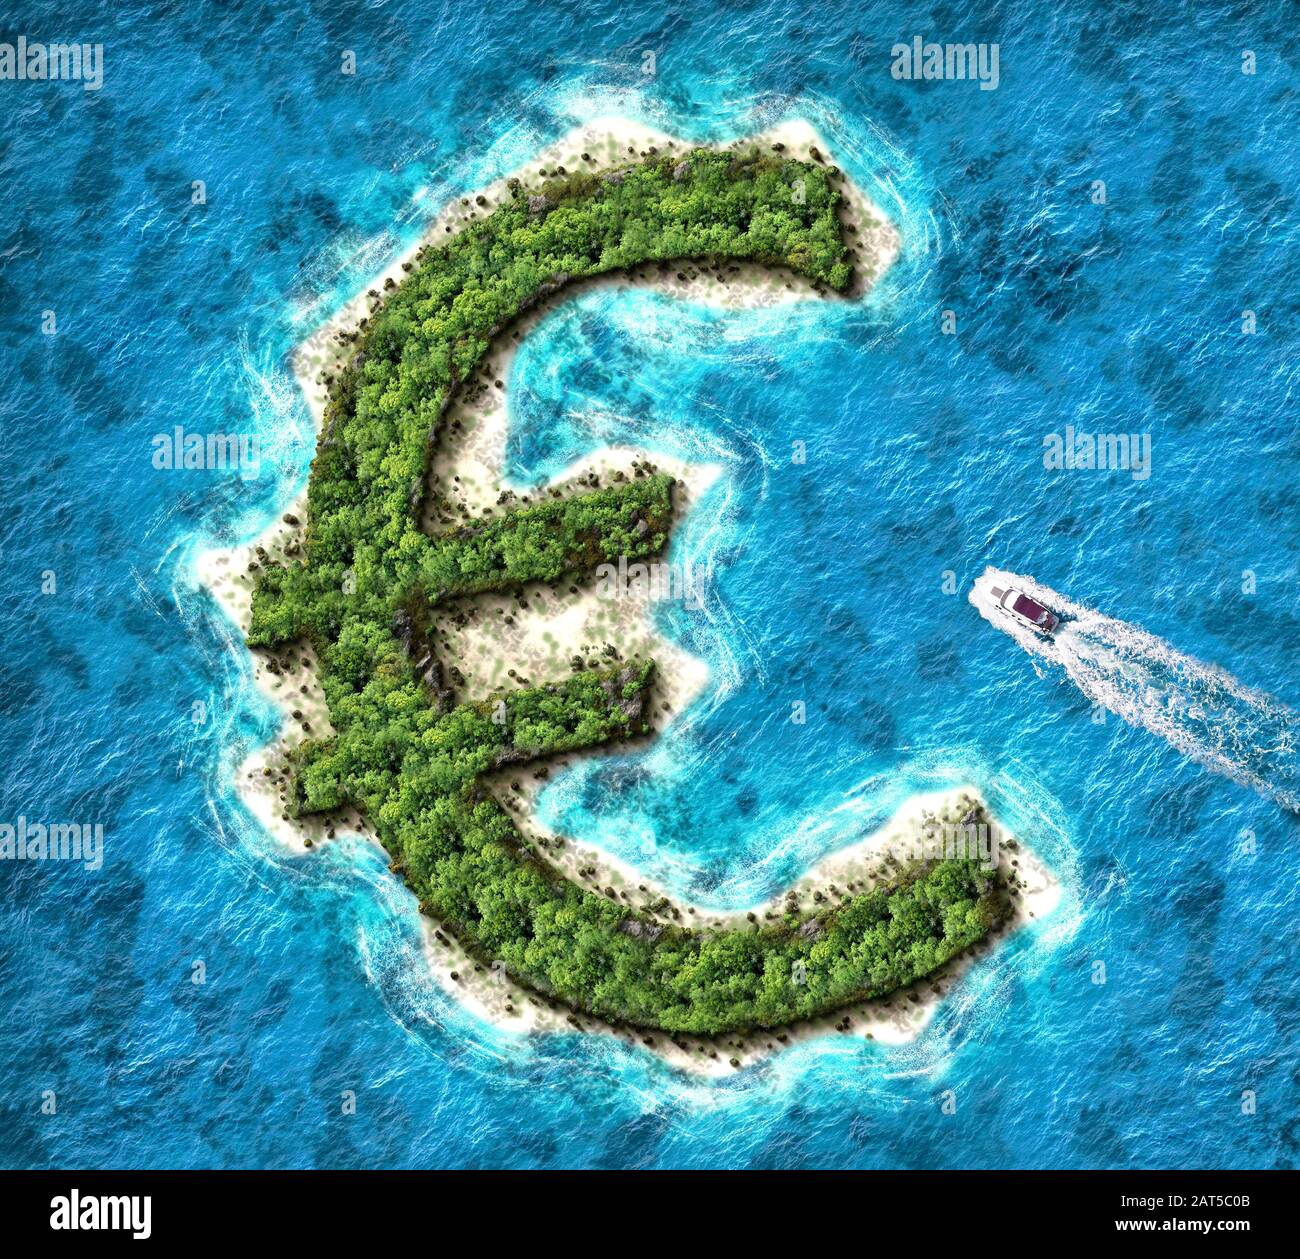 Euro shaped island. Tax haven concept for offshore bank accounts. Stock Photo